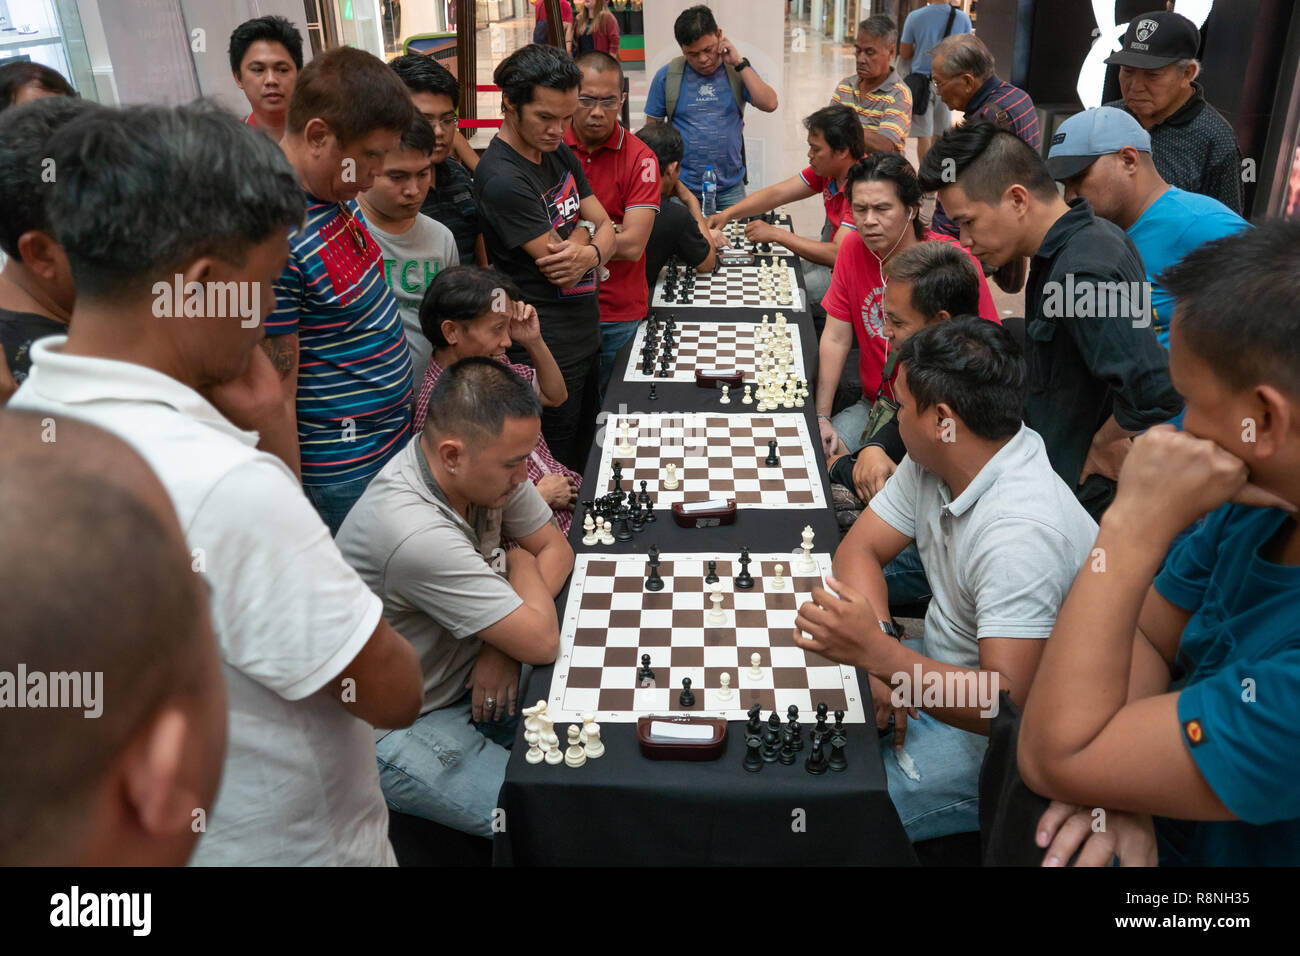 United Chess Players of Calapan, Inc.